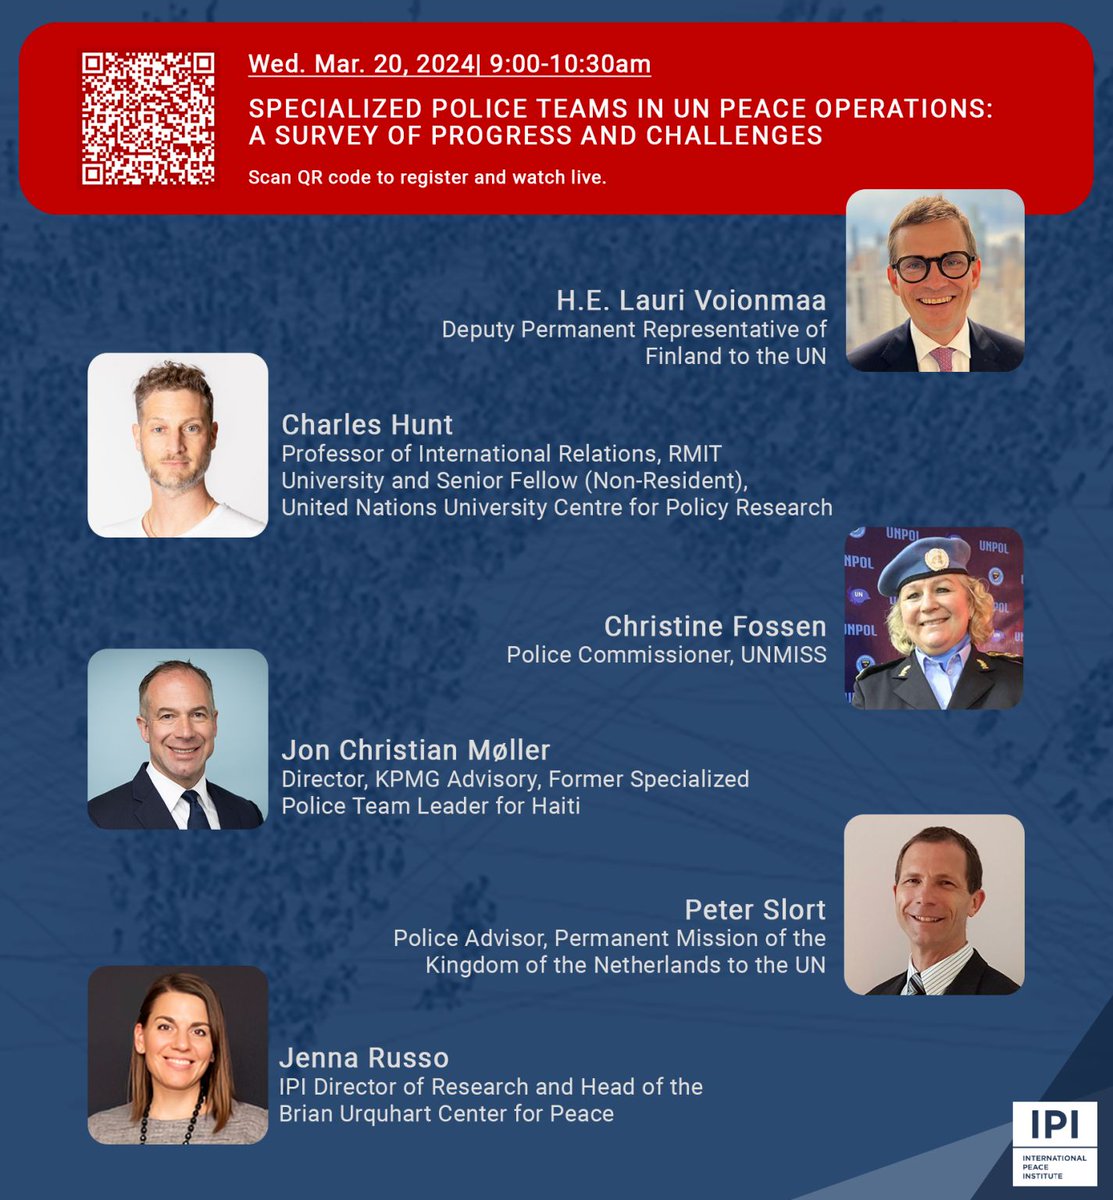 Interested in the future of @UNPOL in 🇺🇳#PeaceOperations? Join launch of my new @IPInst report “Specialized Police Teams in UN Peace Operations: A Survey of Progress and Challenges” cohosted by @KingdomNL_UN & @FinlandUN. 🗓️Wed. Mar. 20 9:00AM EST RSVP: ipinst.org/2024/03/specia…